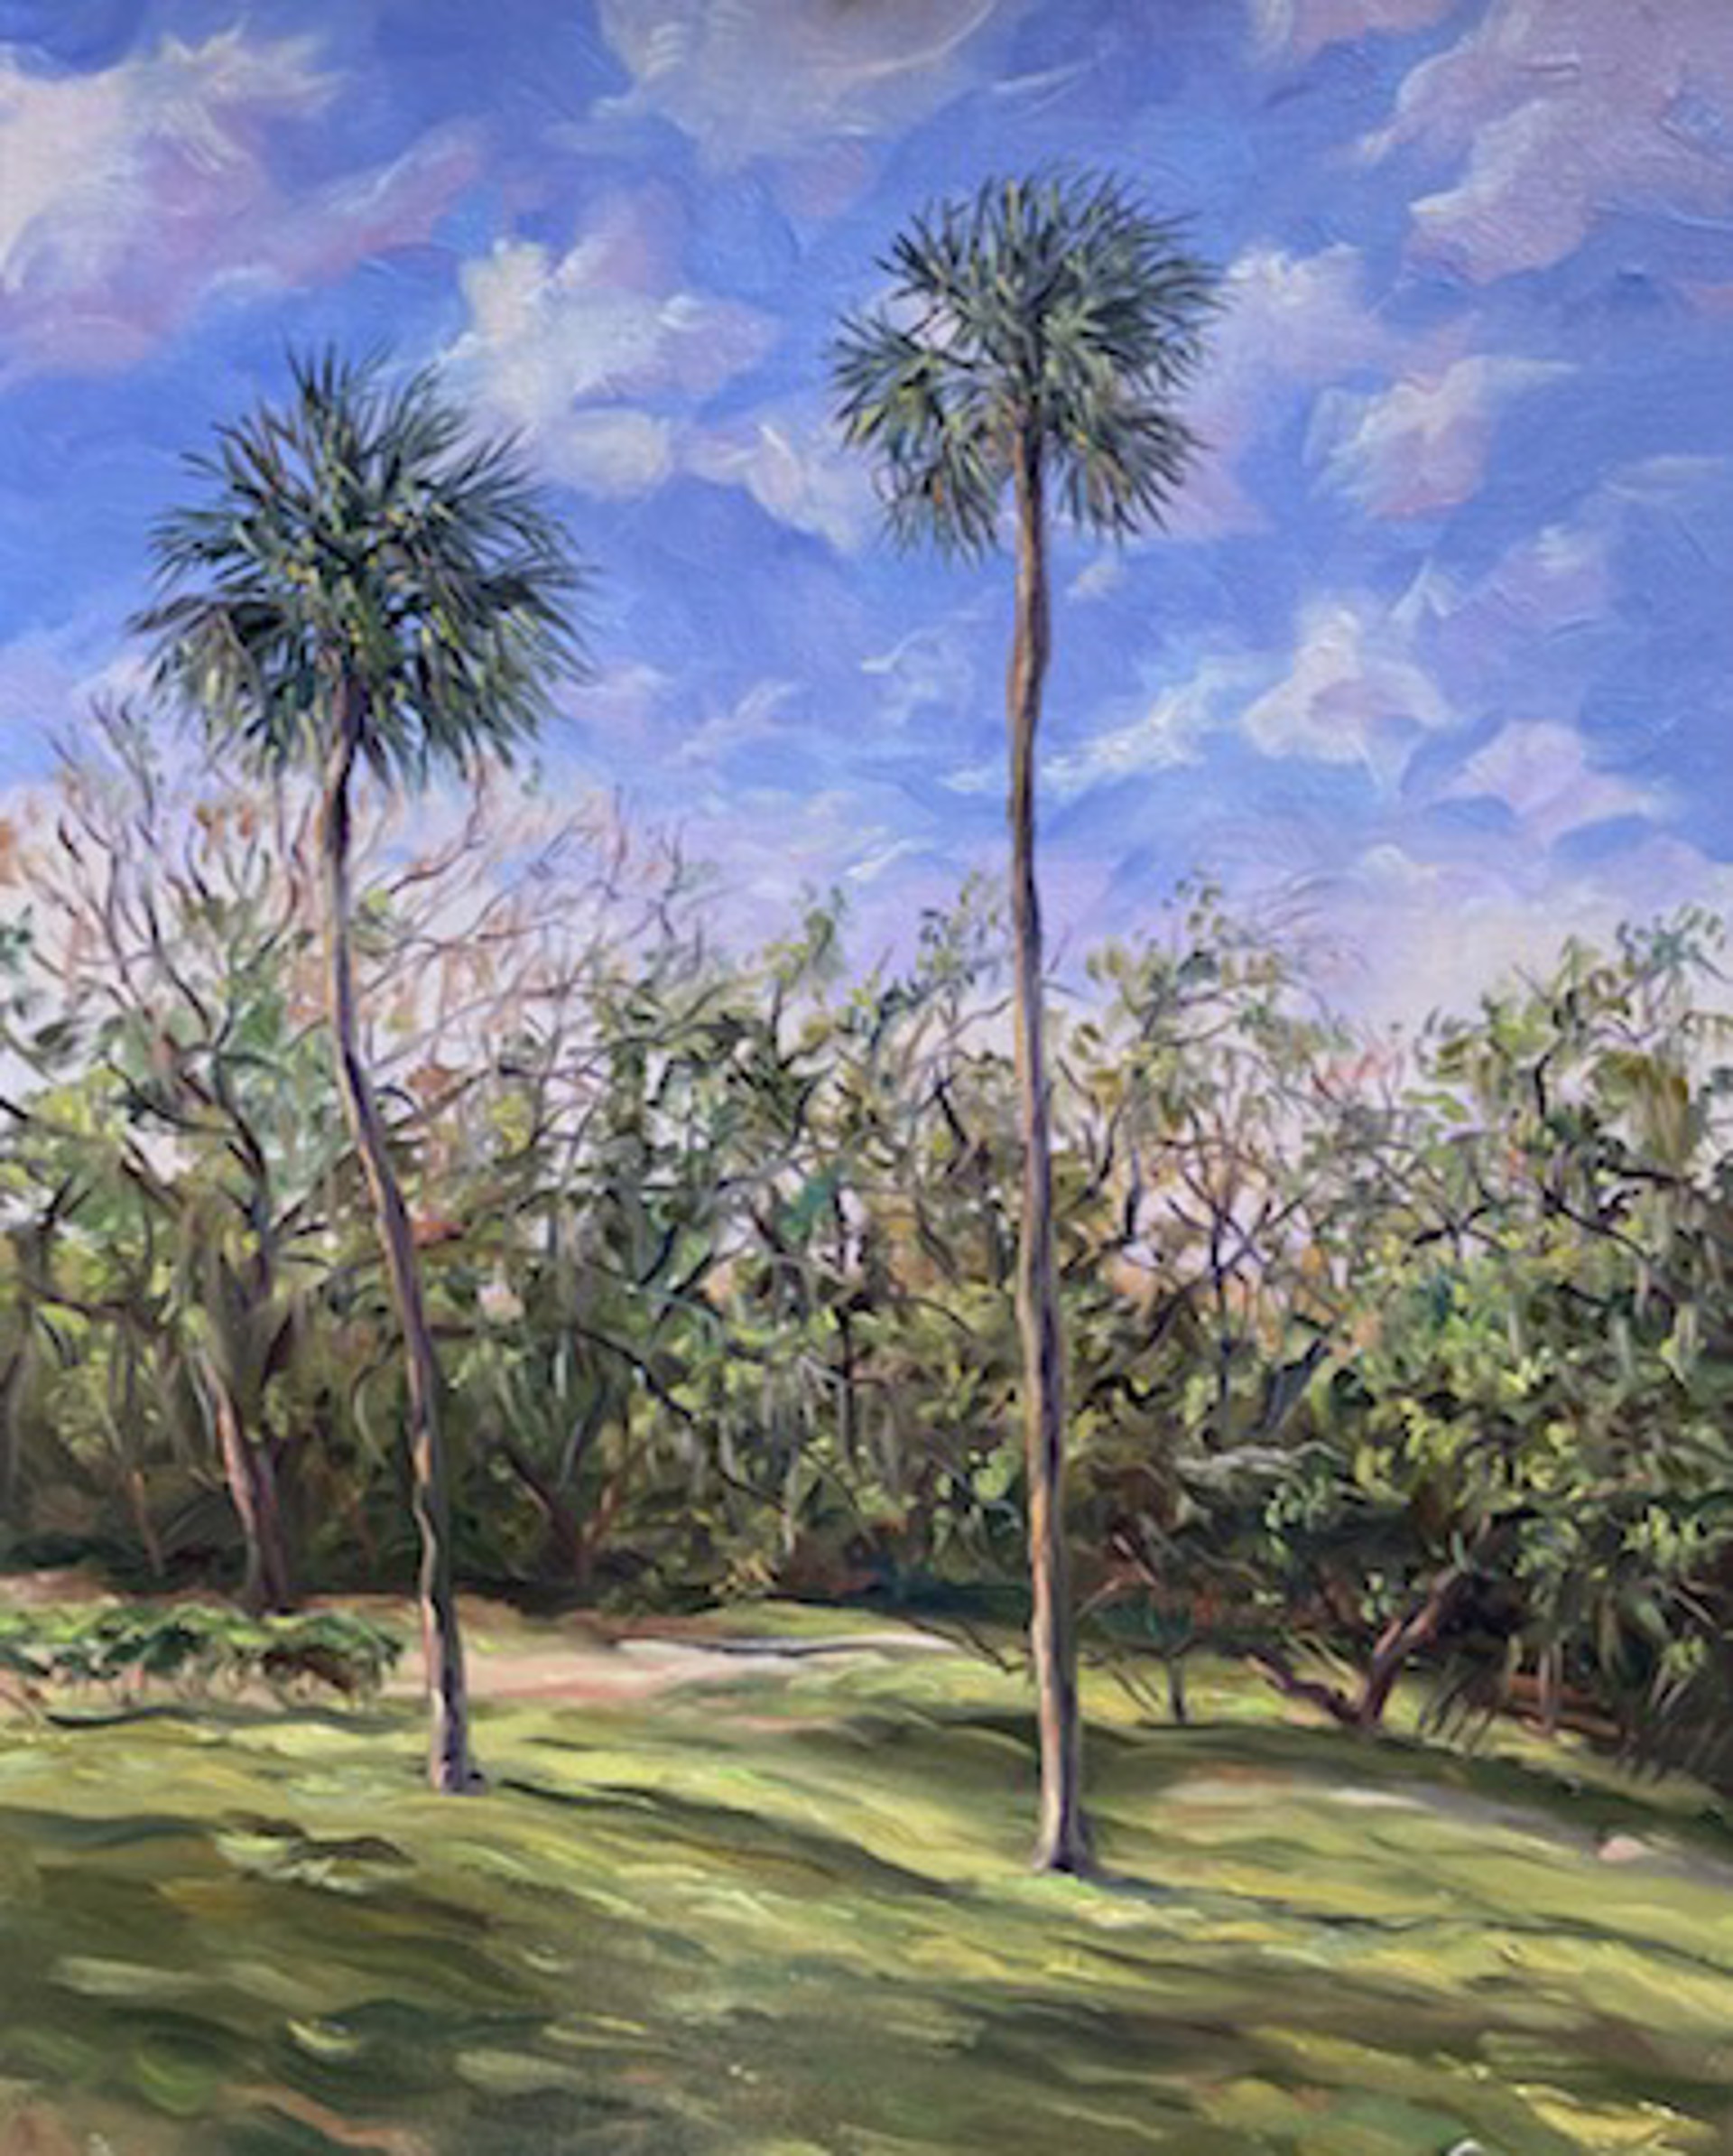 Whispering Palms by Charles Dickinson